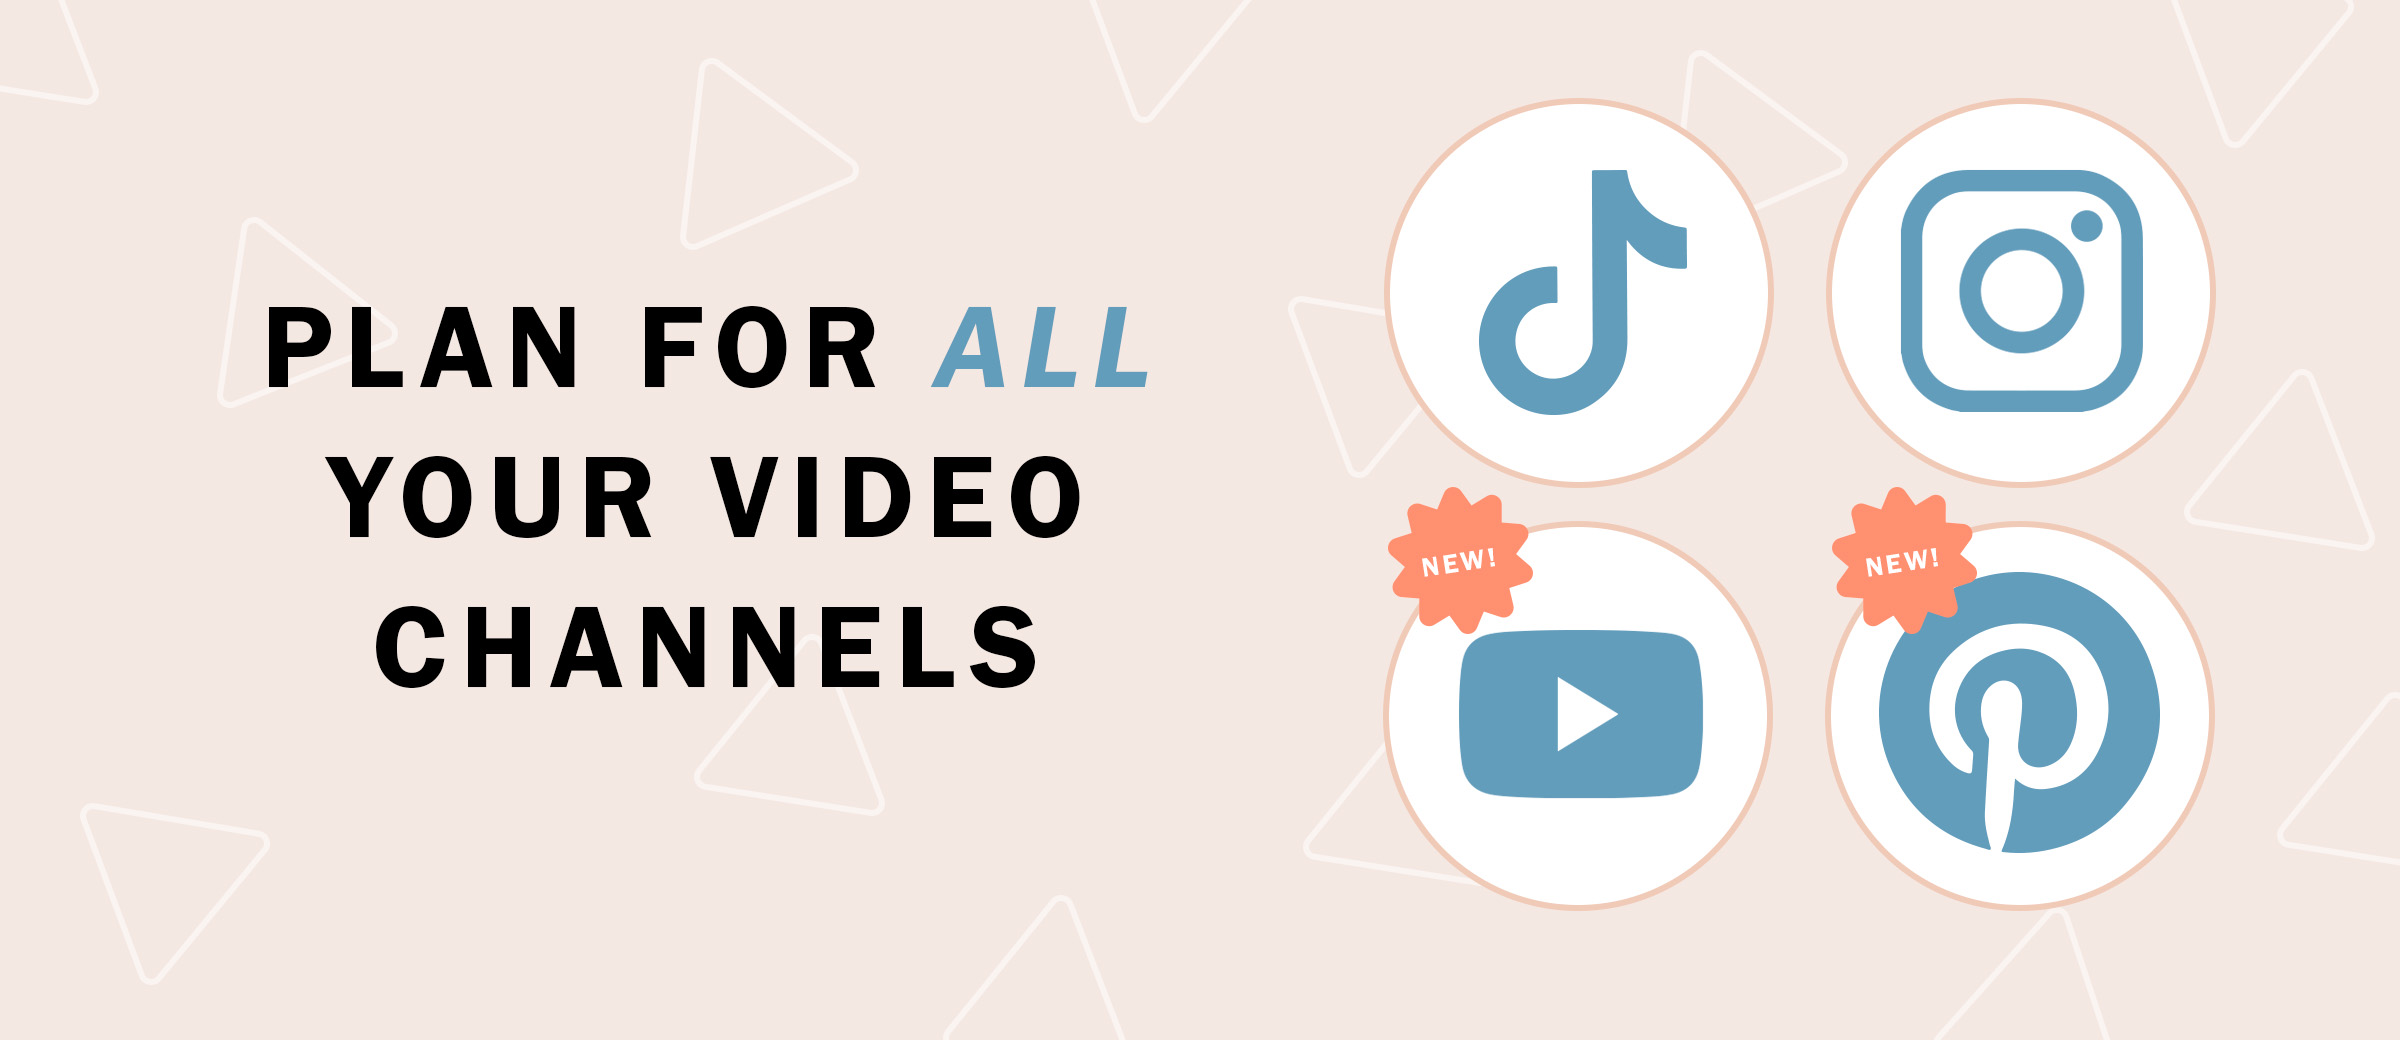 First 4-in-1 Video Planner: Post Your Content on Multiple Social Media Platforms